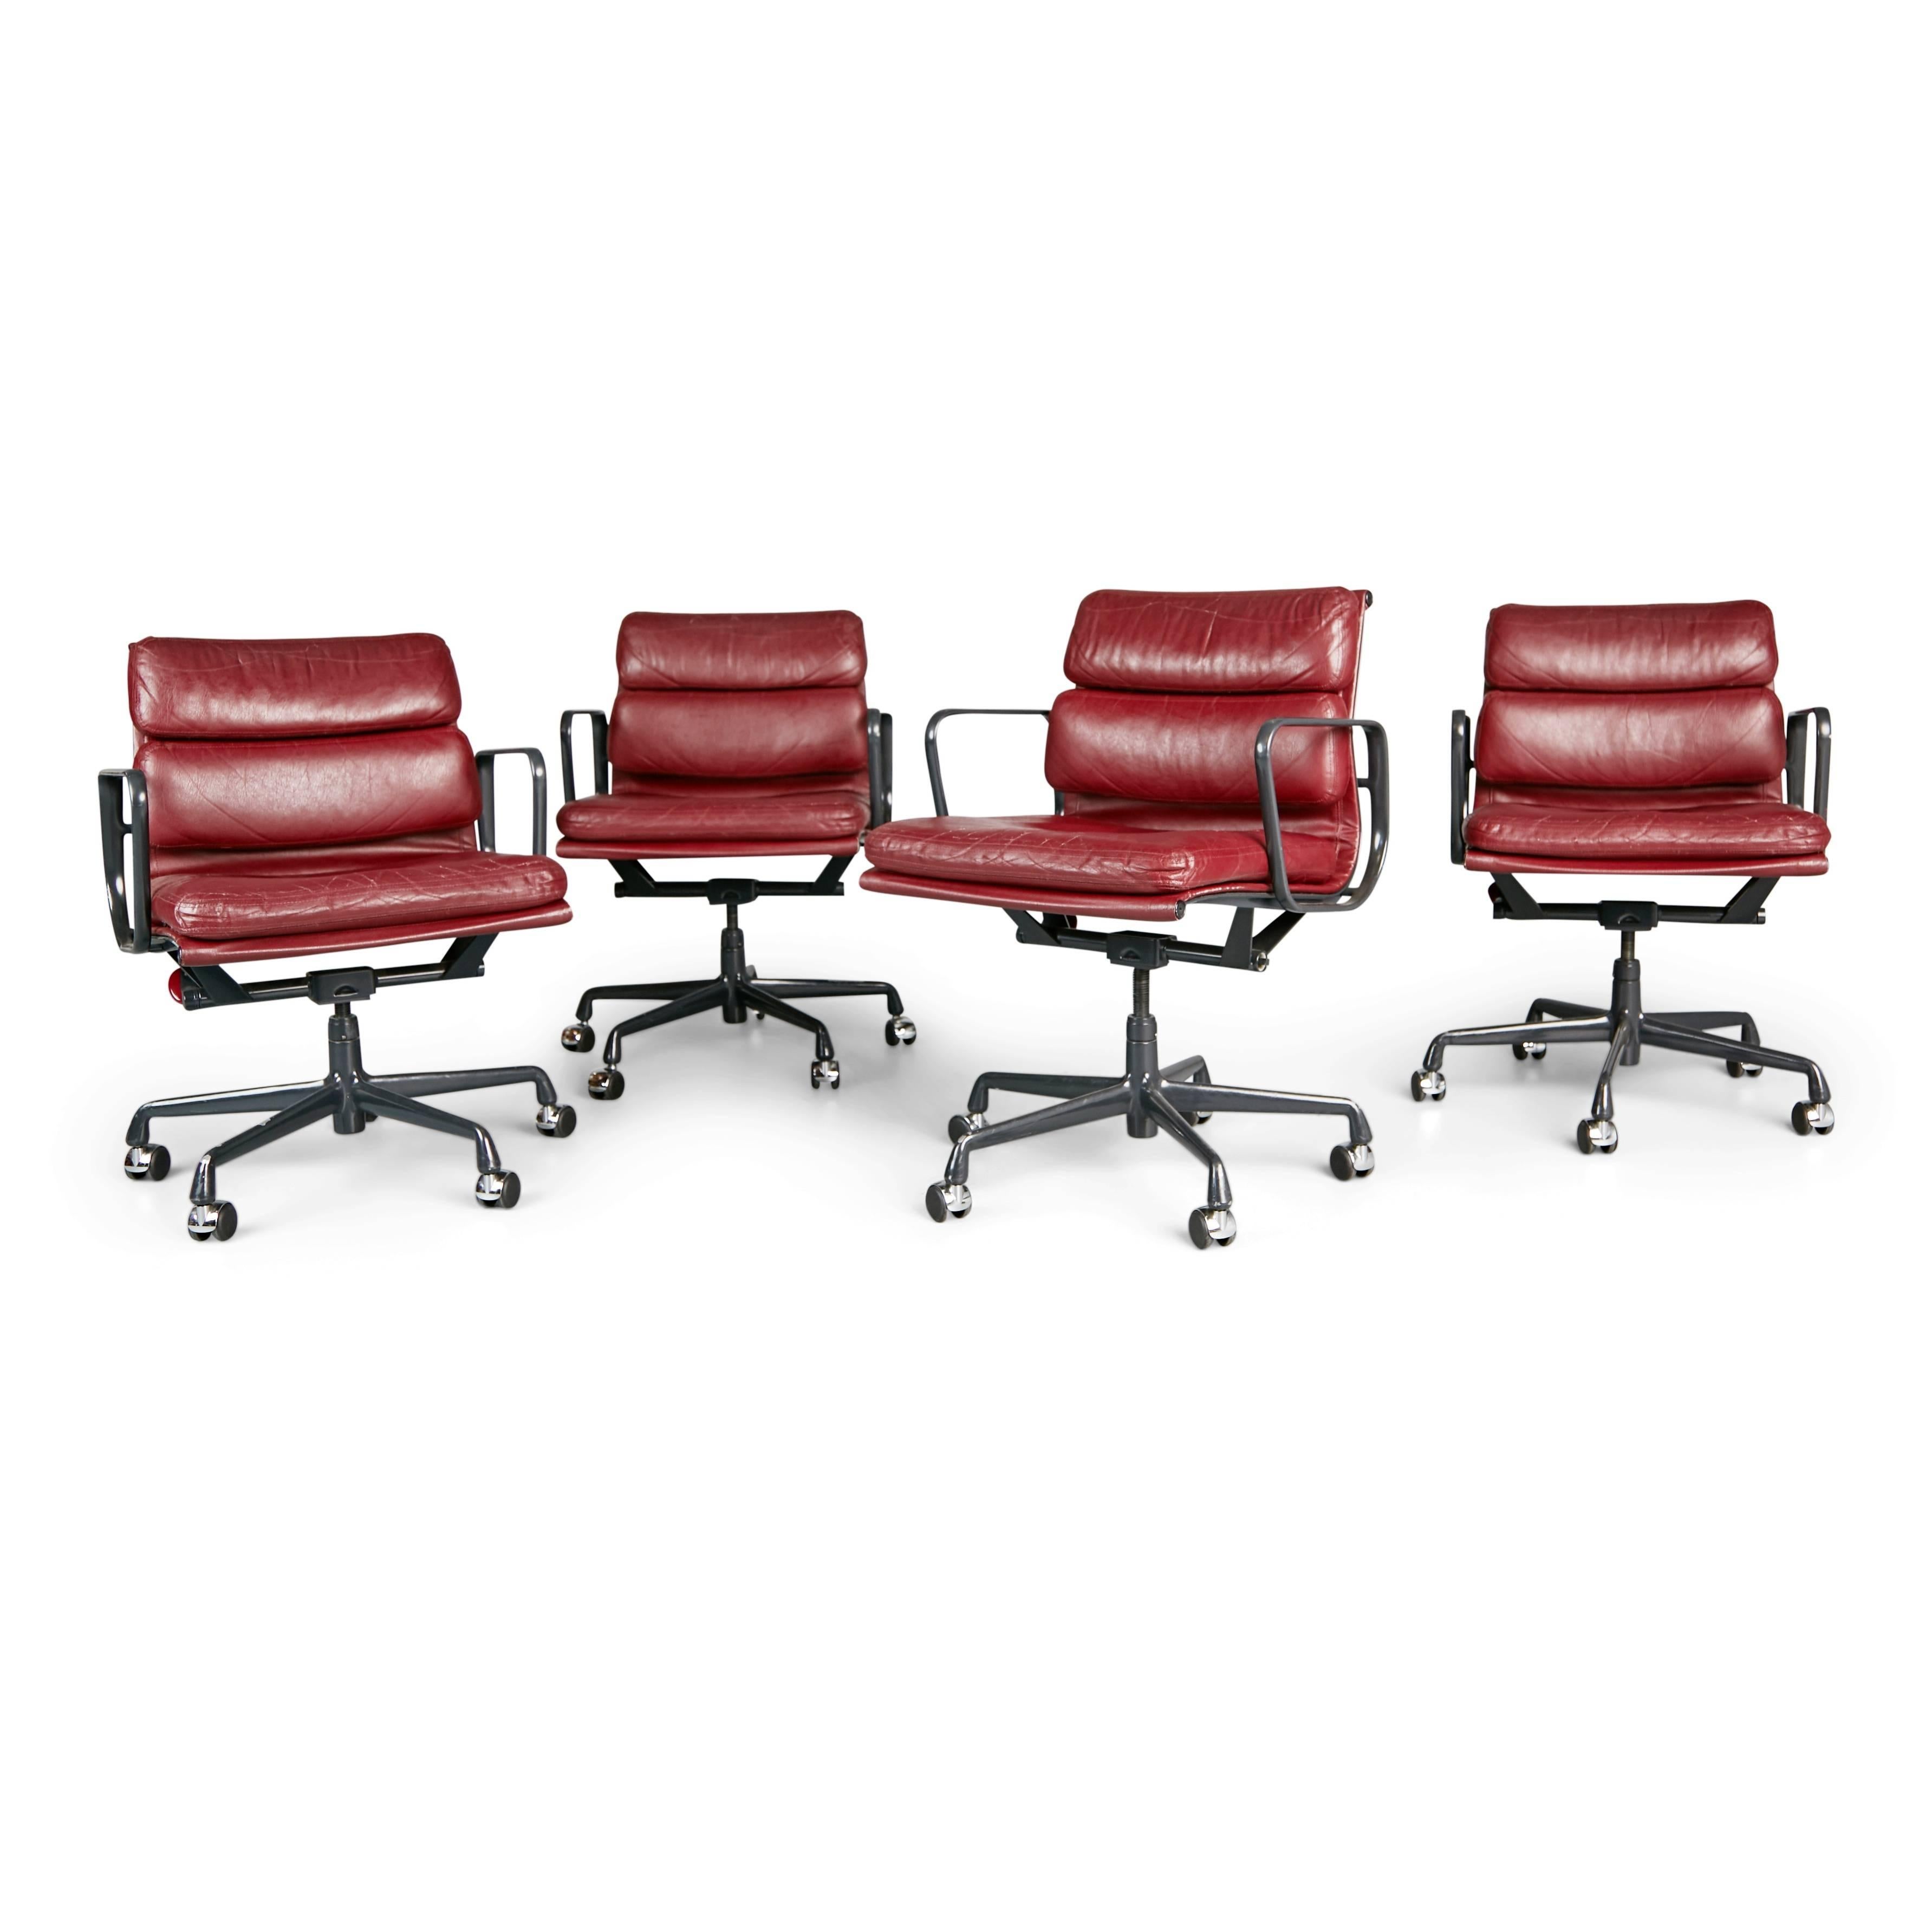 We have three left from this set of renown Soft Pad Aluminum Group Management desk chairs available designed by Charles and Ray Eames for Herman Miller. Priced individually. Featuring the original vintage rich burgundy leather upholstery over dark